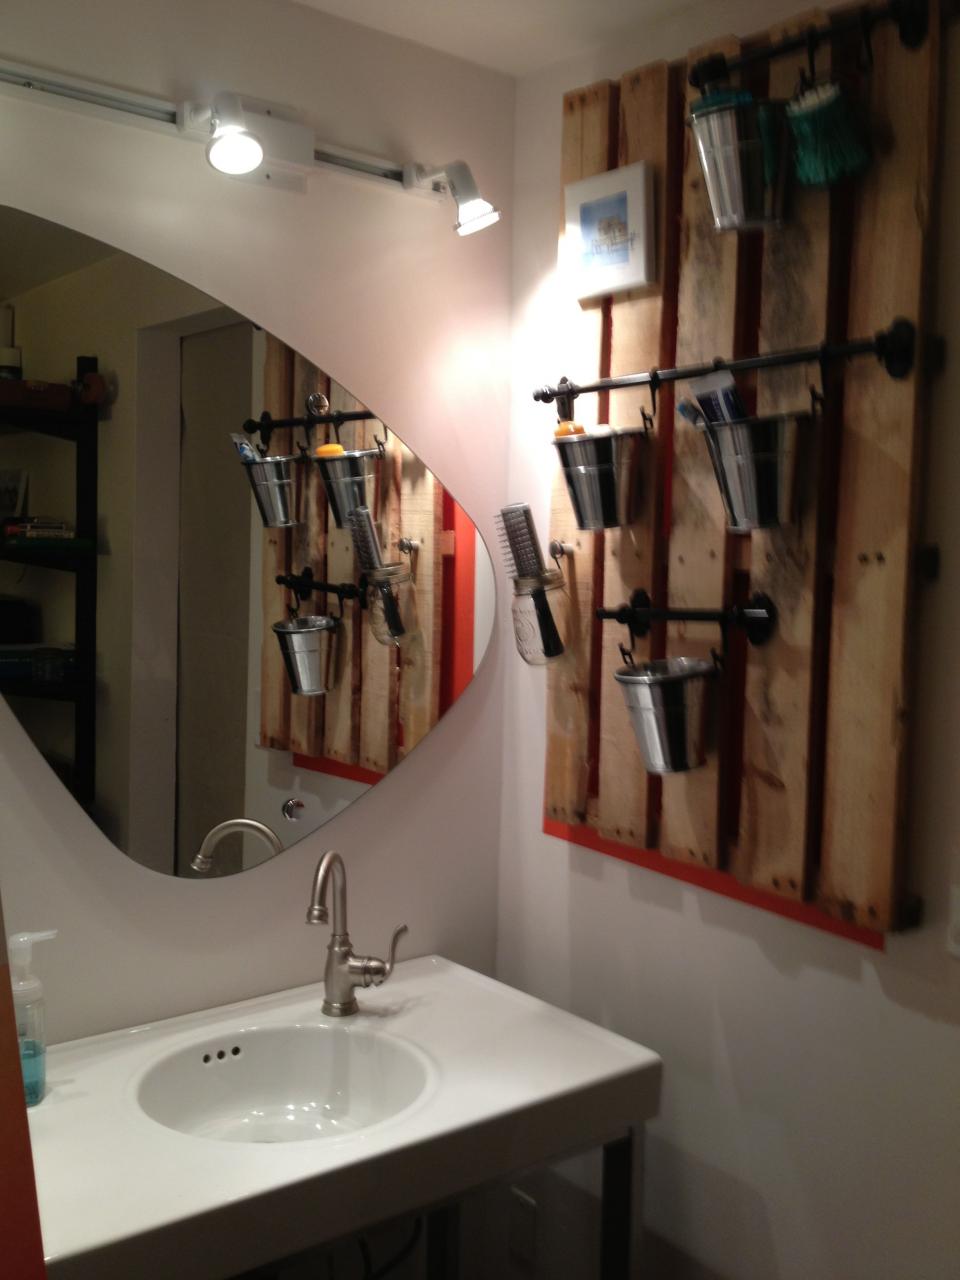 "Funky" bathroom update using Ikea mirror and recycled pallet. Recycled